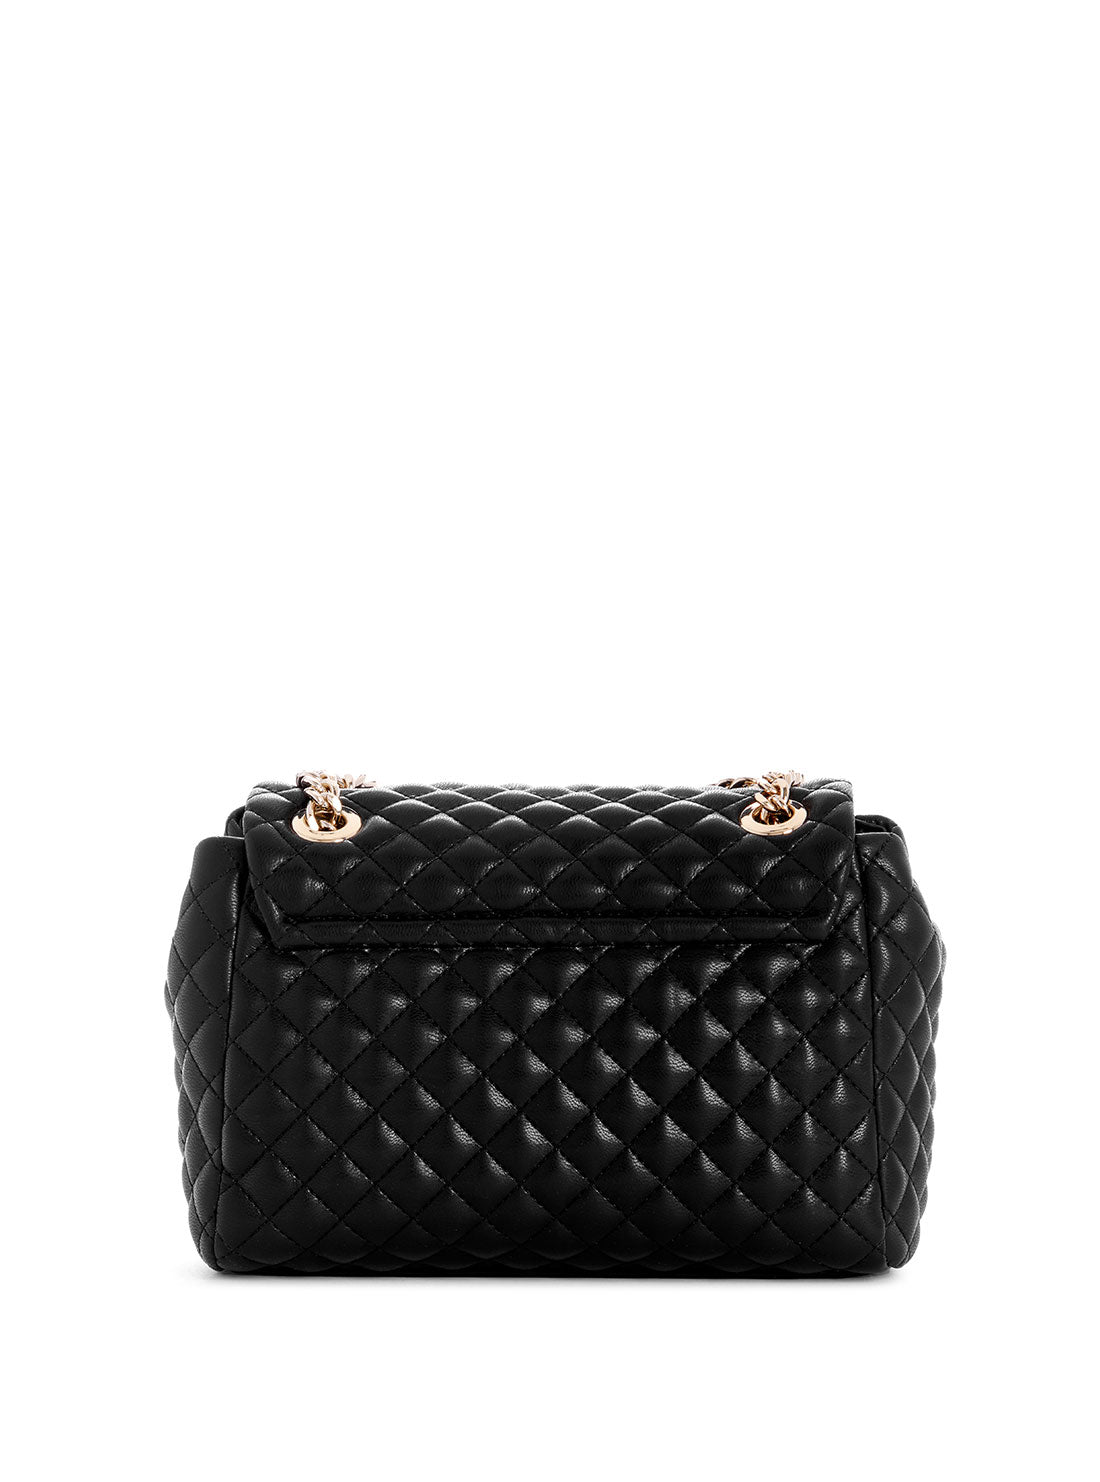 GUESS Black Rianee Crossbody Flap Bag side view back view